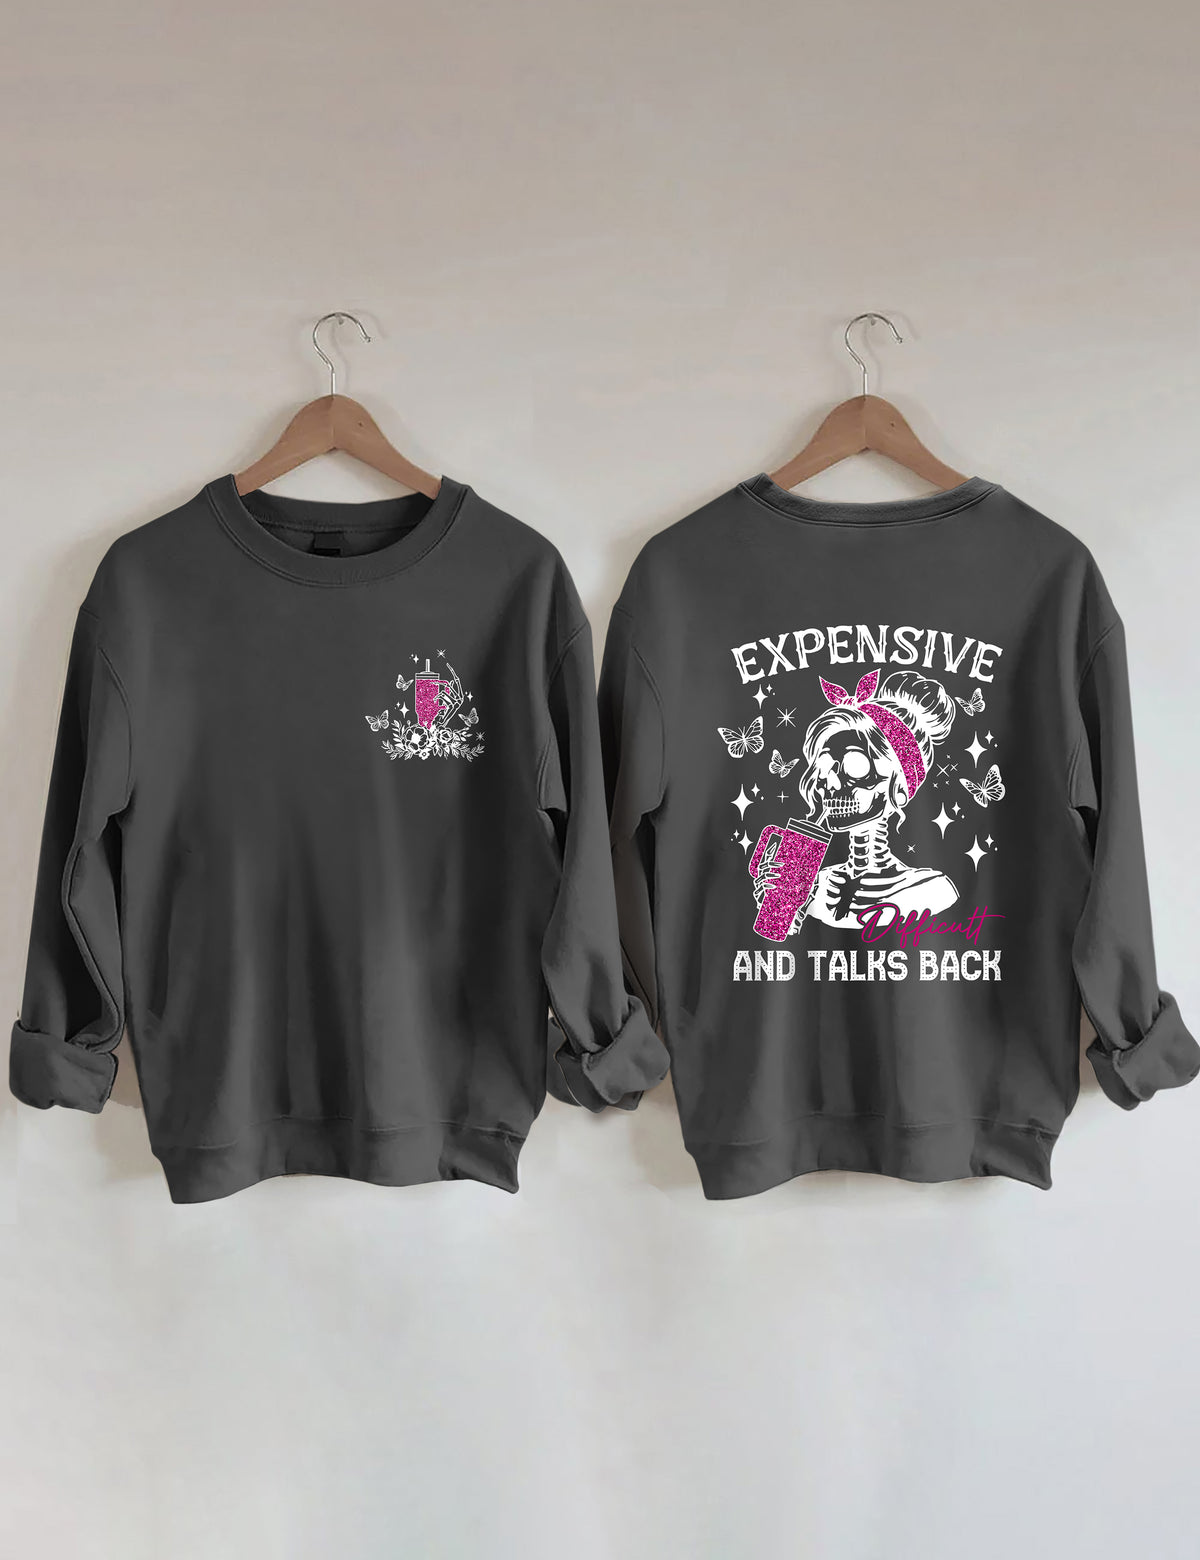 Expensive Difficult And Talks Back Funny Sweatshirt